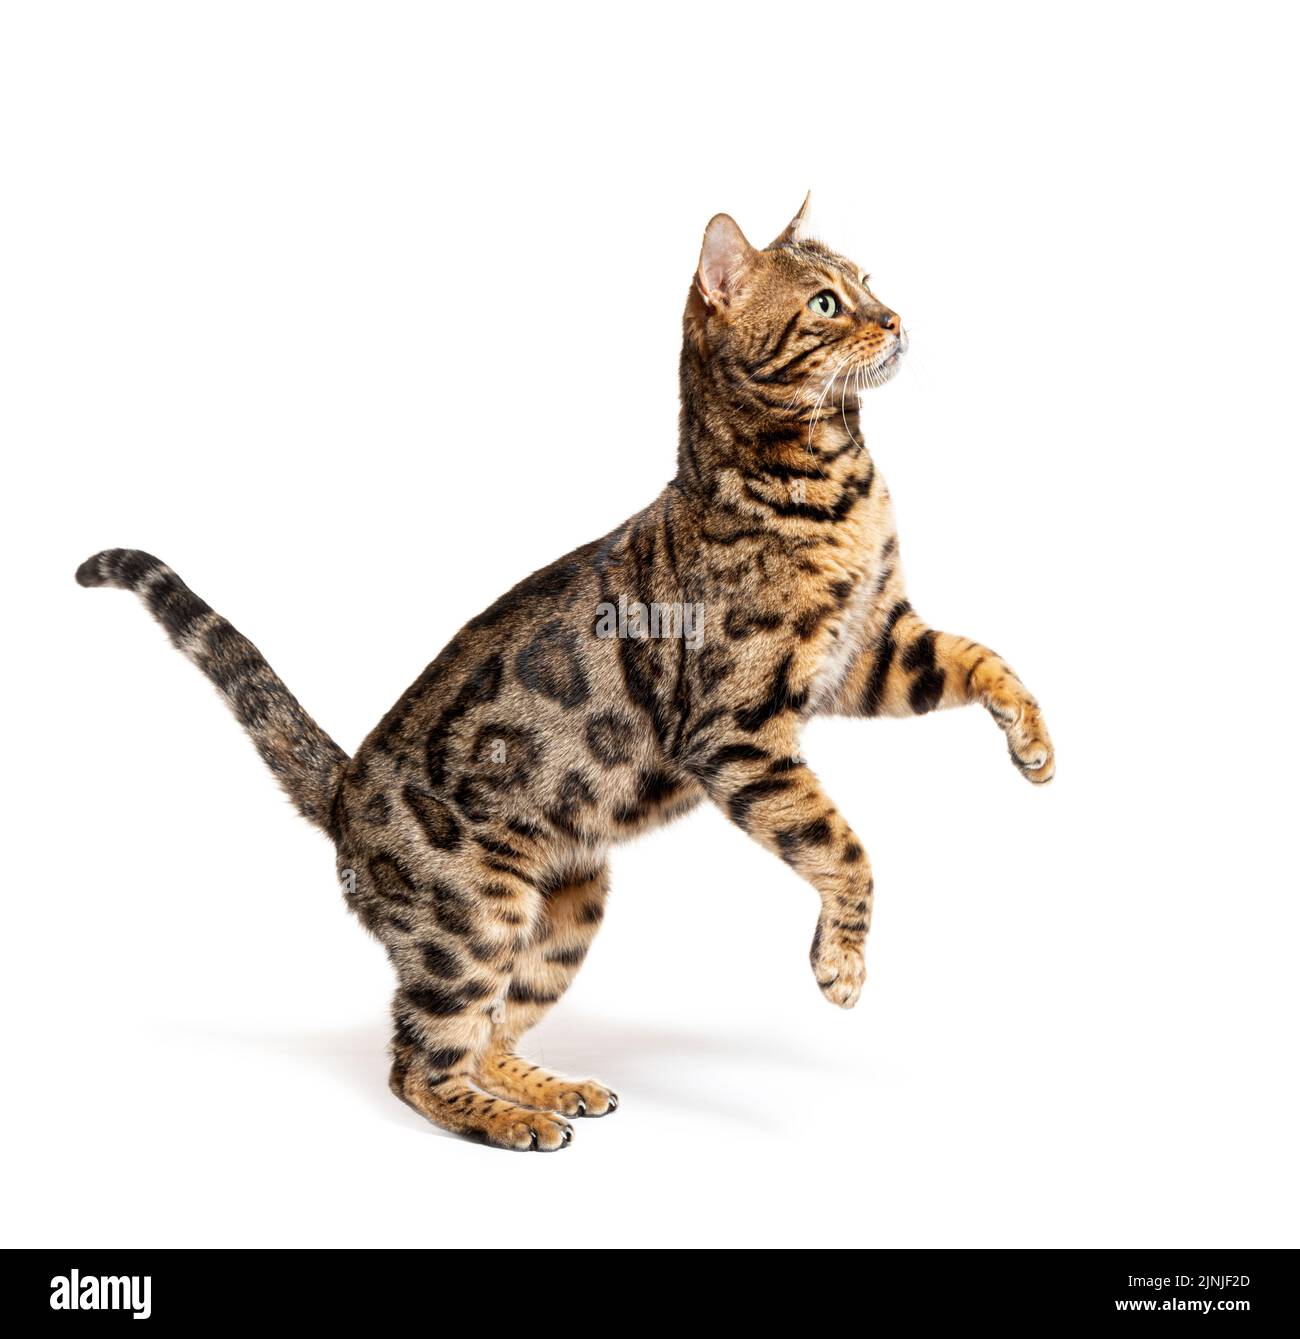 Side view of a Bengal cat jumping up, isolated on white Stock Photo